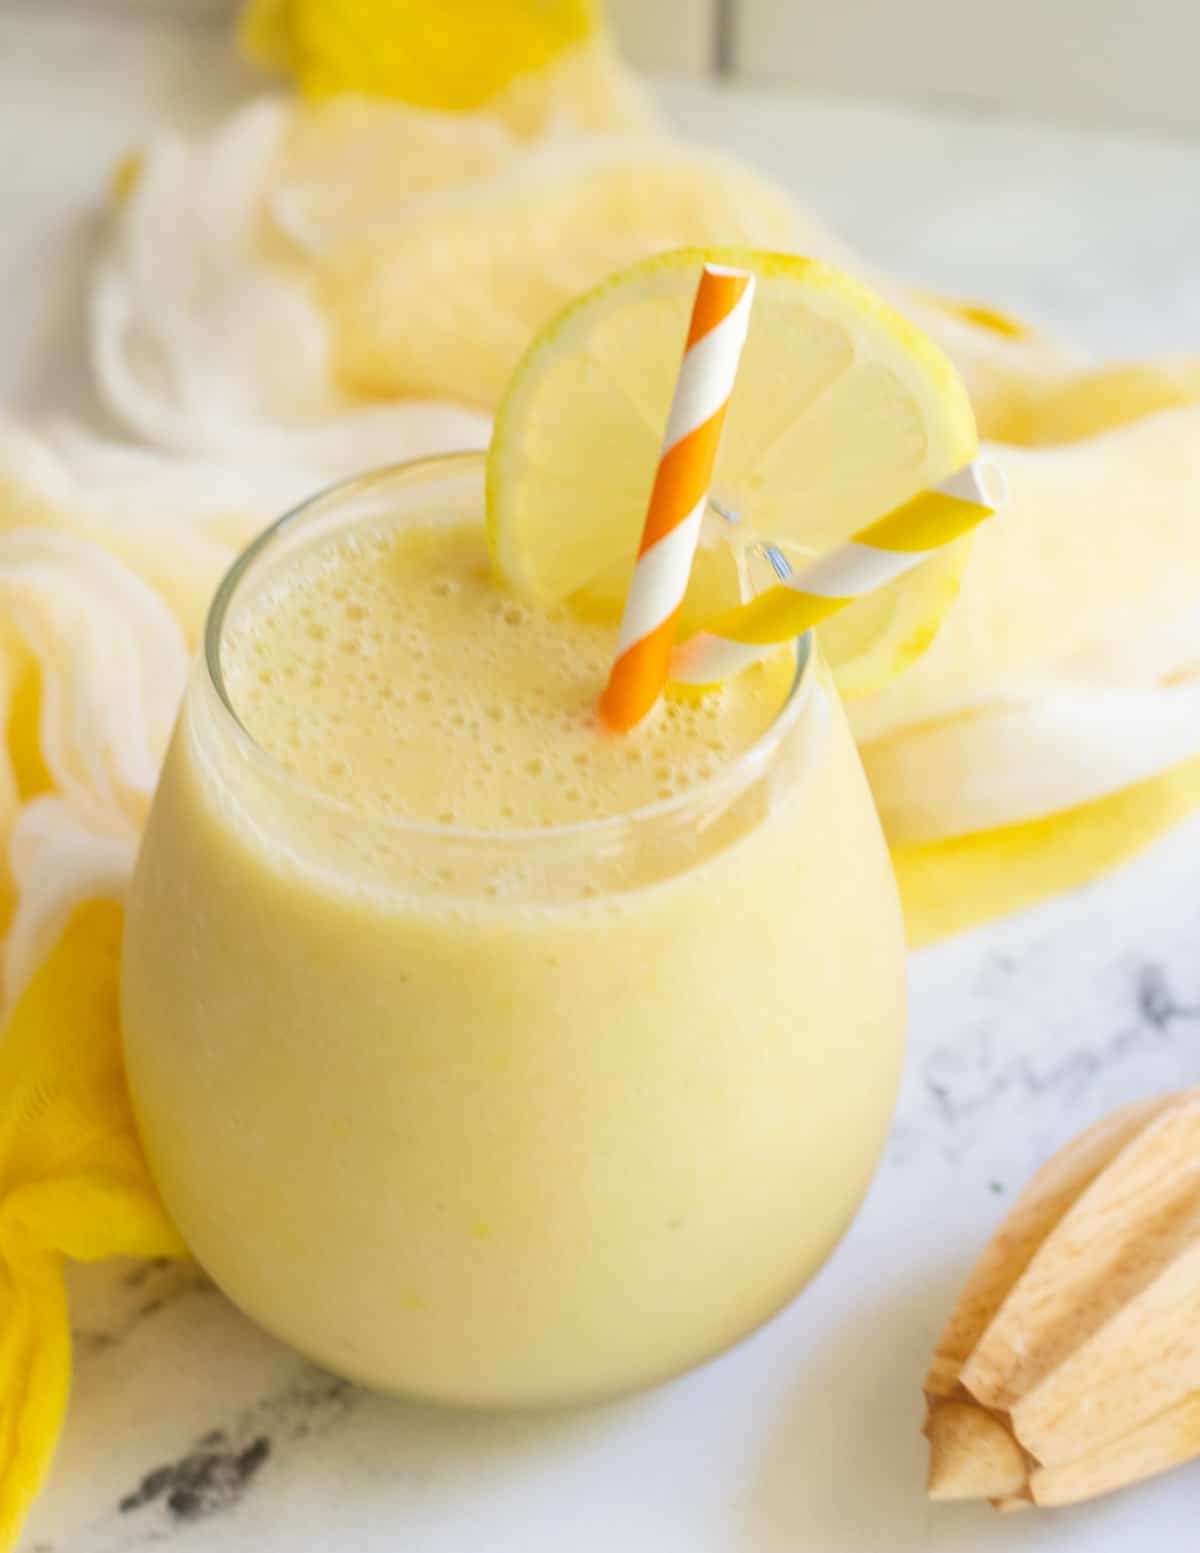 Yellow smoothie in glass.
